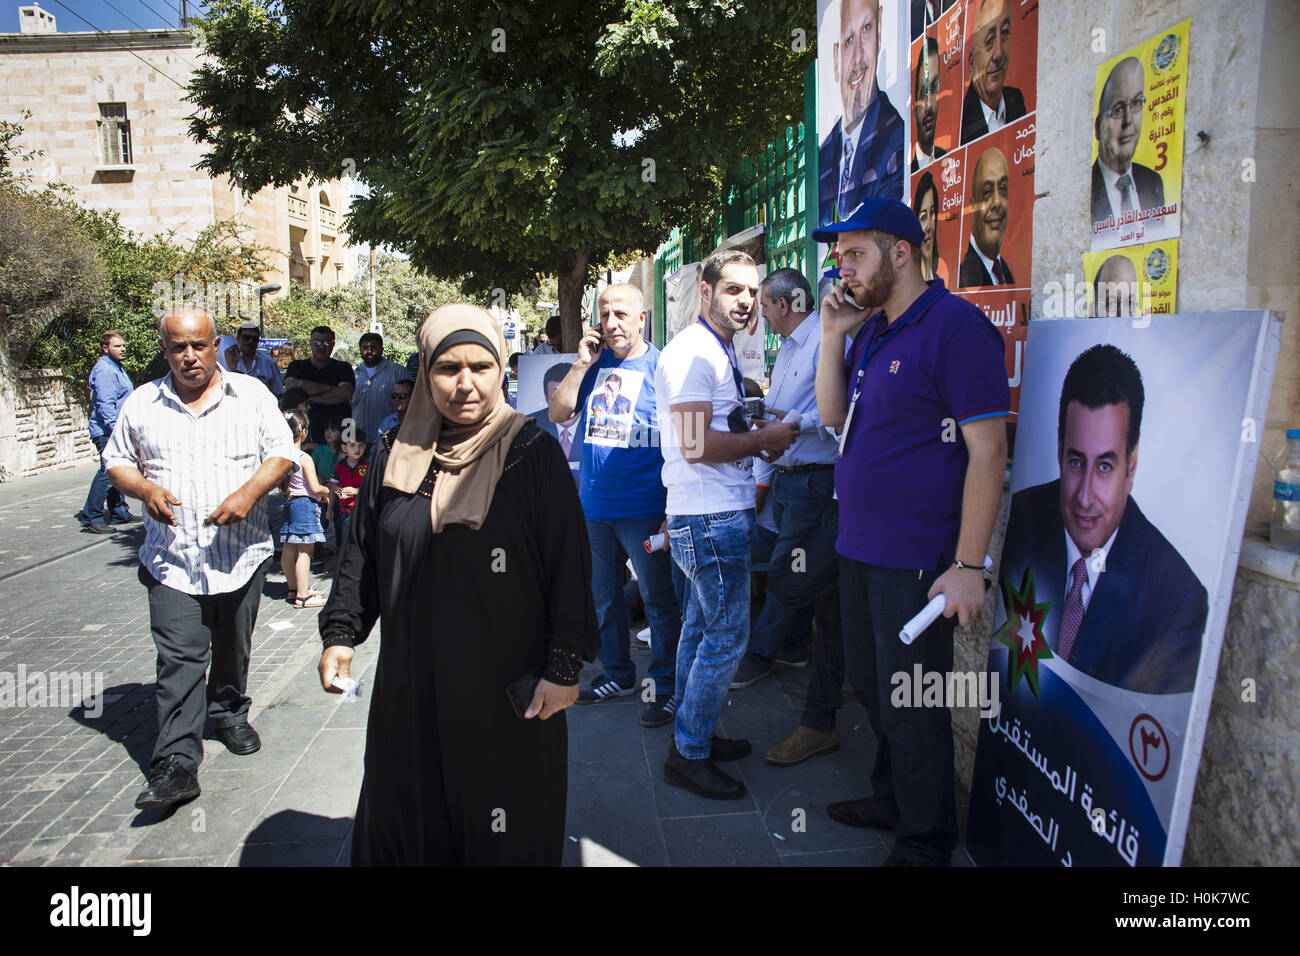 Amman, Amman, Jordan. 20th Sep, 2016. A crowd of supporters and seen outside a polling station at a girls' school in Jebel Amman neighborhood of Amman, Jordan, during parliamentary